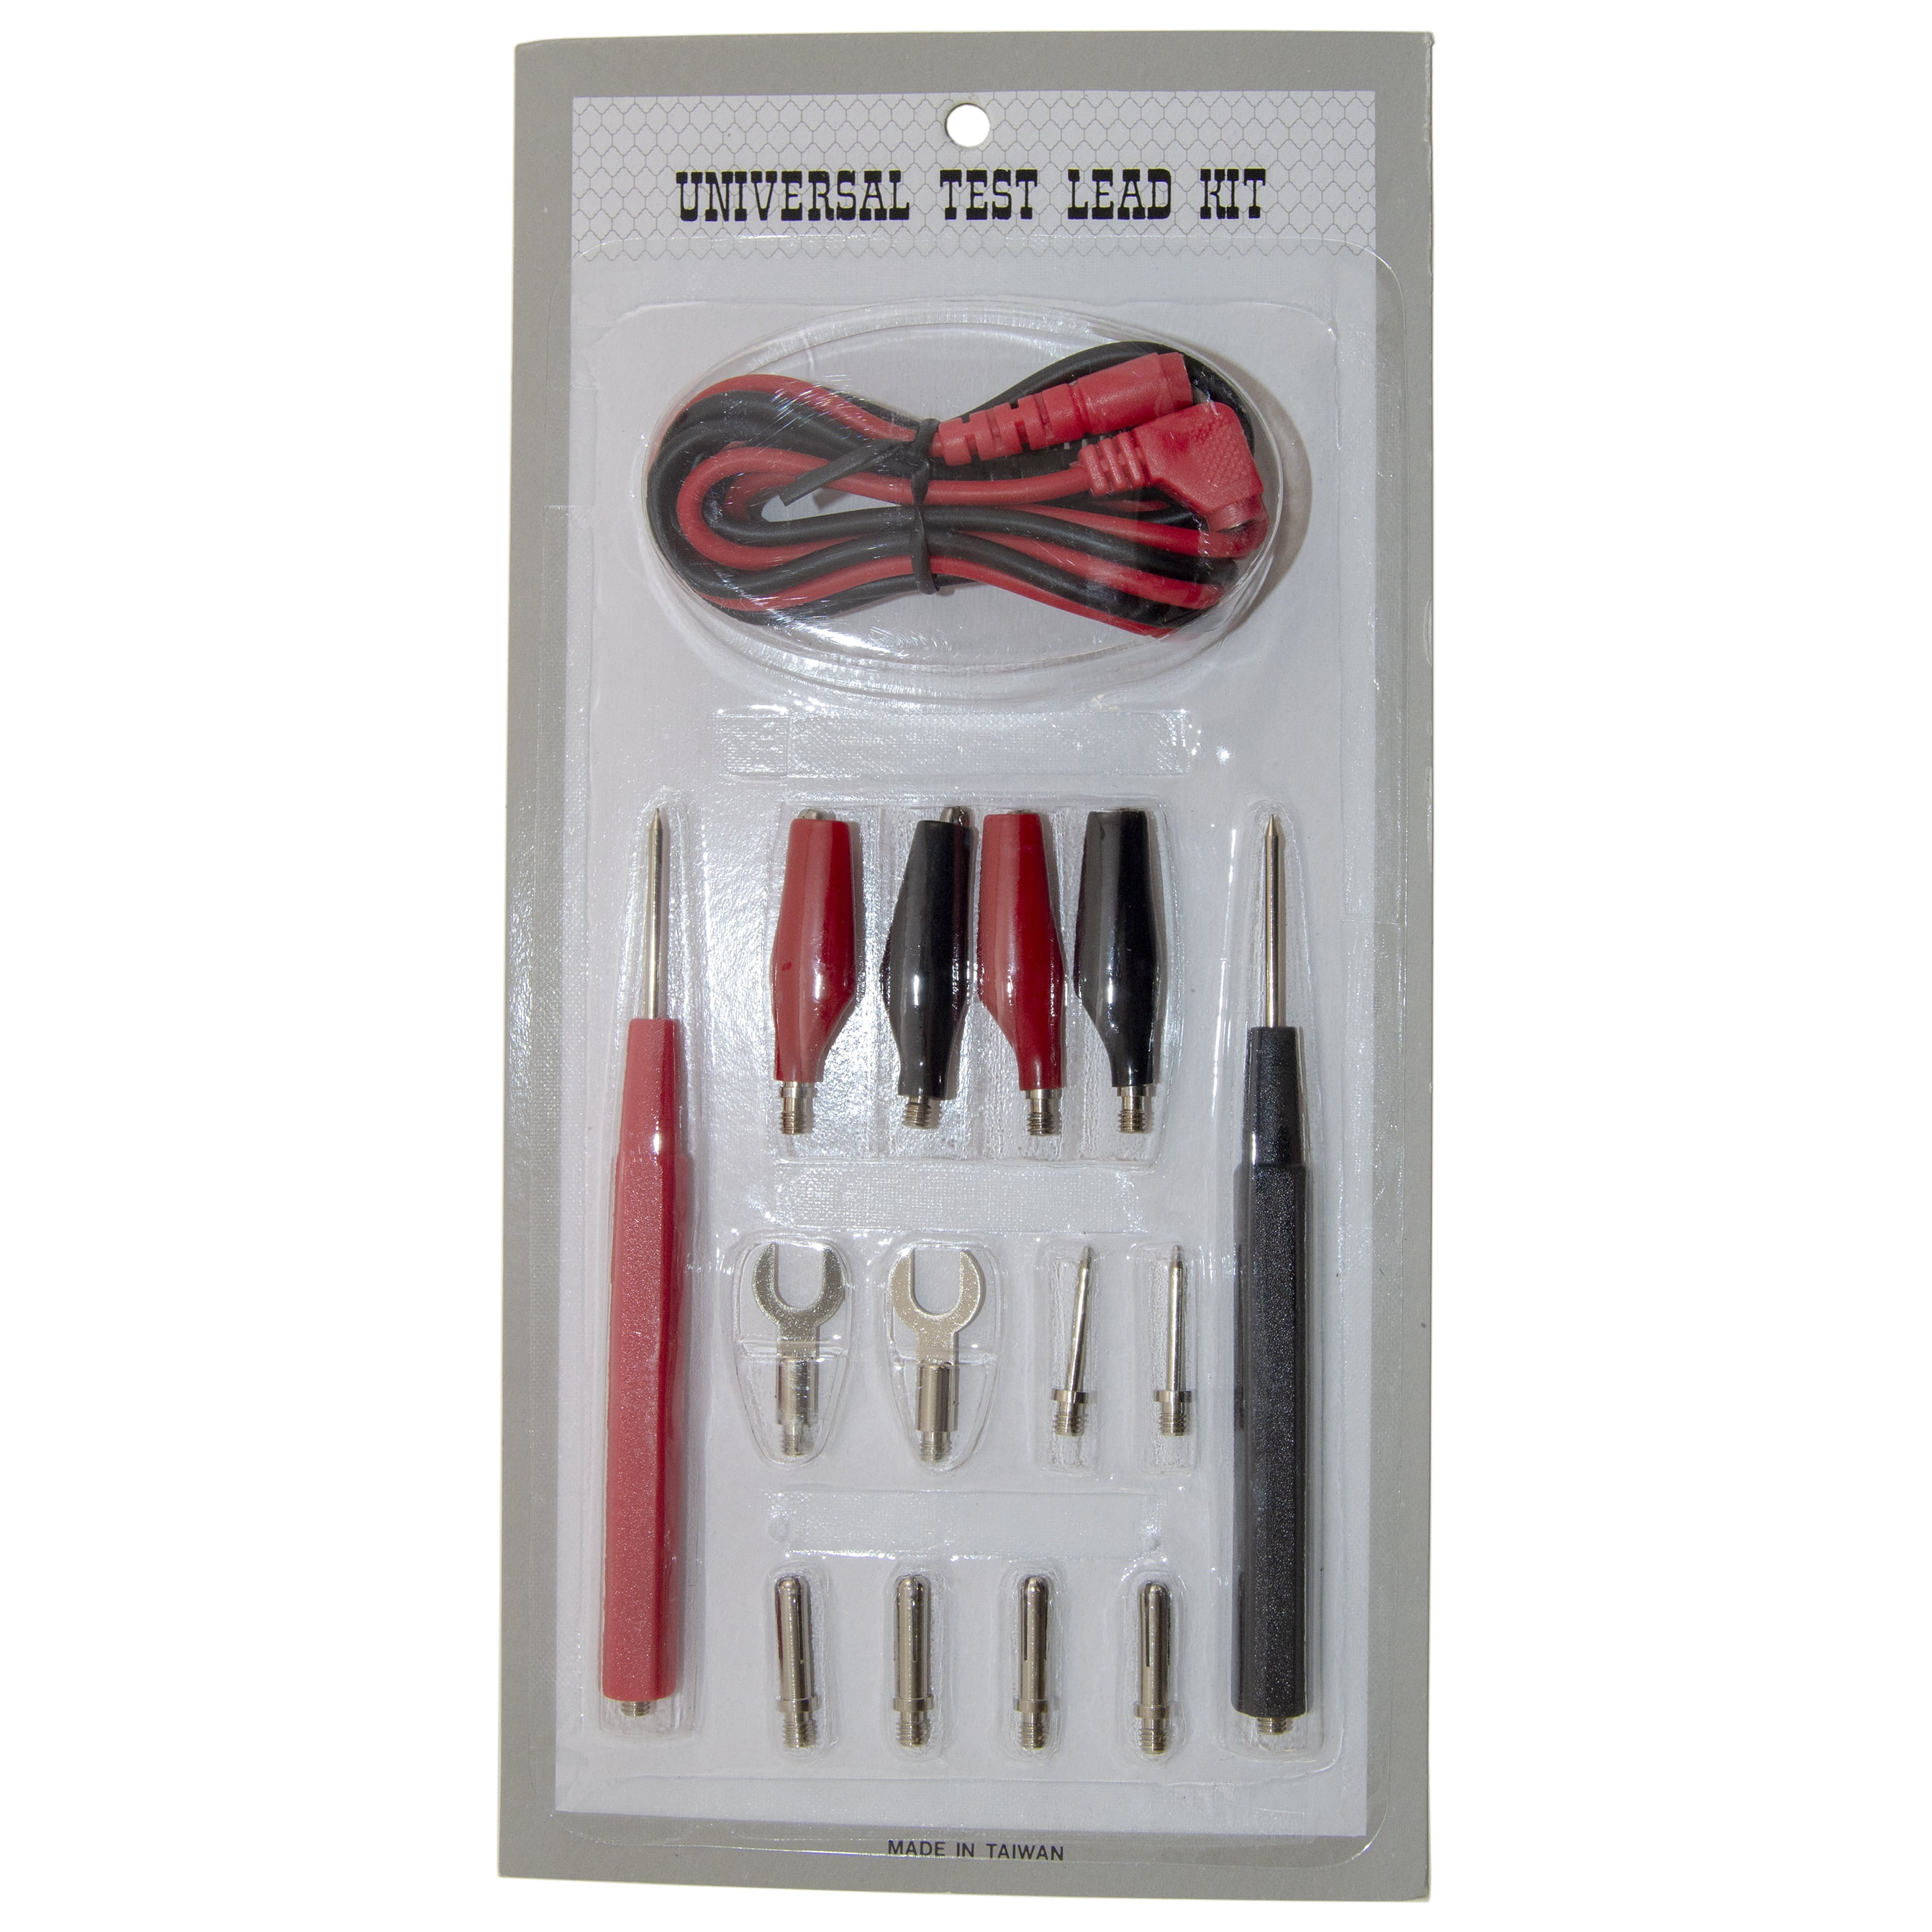 Universal Test Lead Kit with Probes Ring Tongues Alligator Clips Banana Plugs 